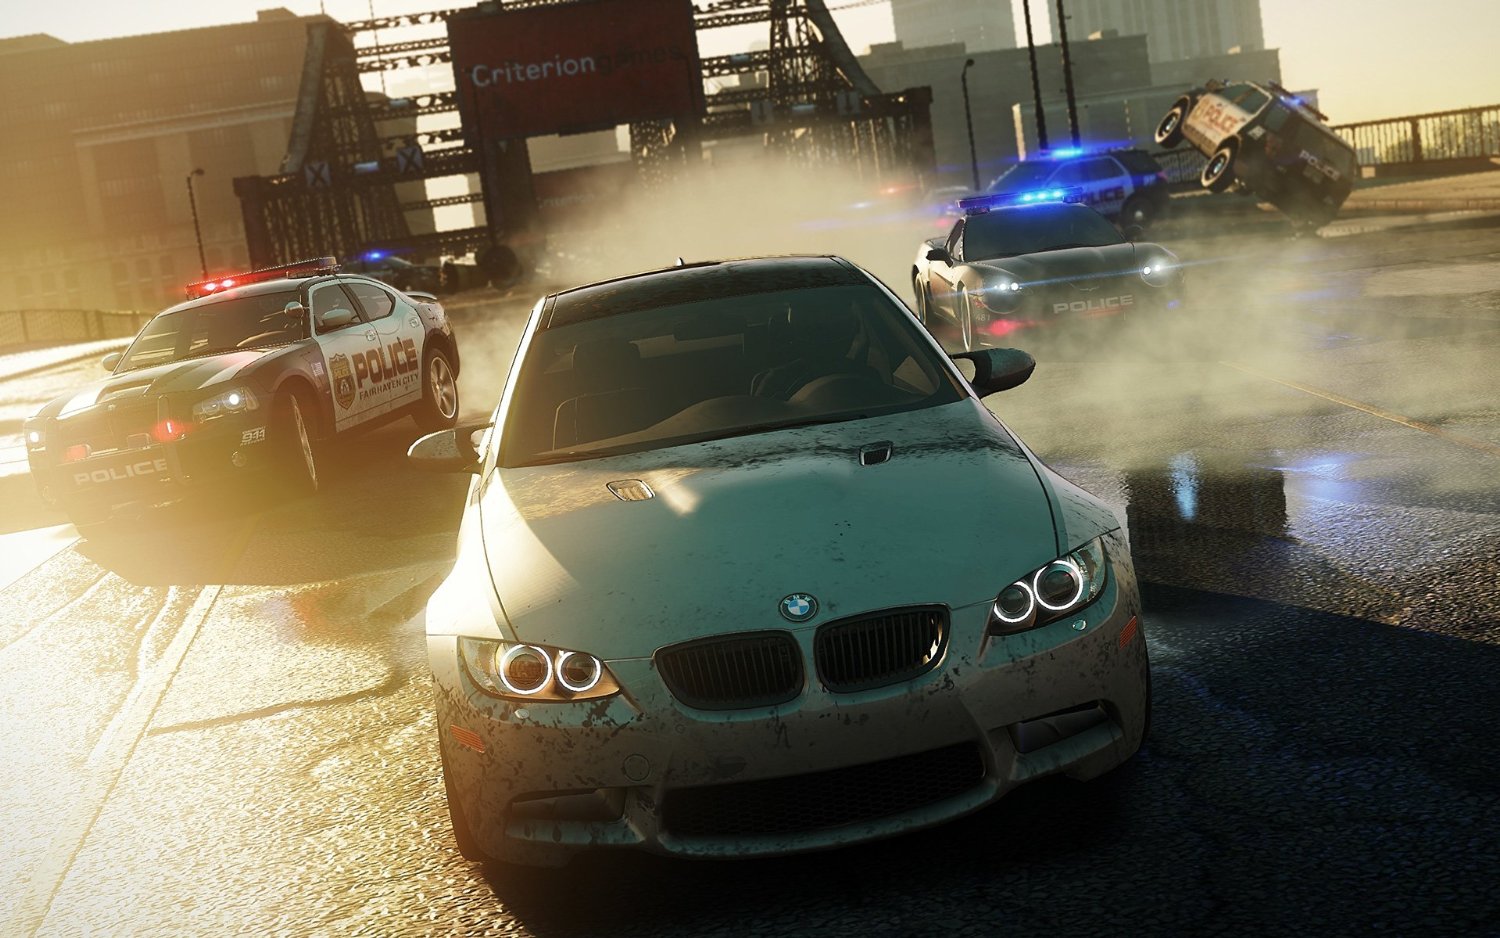 nfs most wanted pc download free